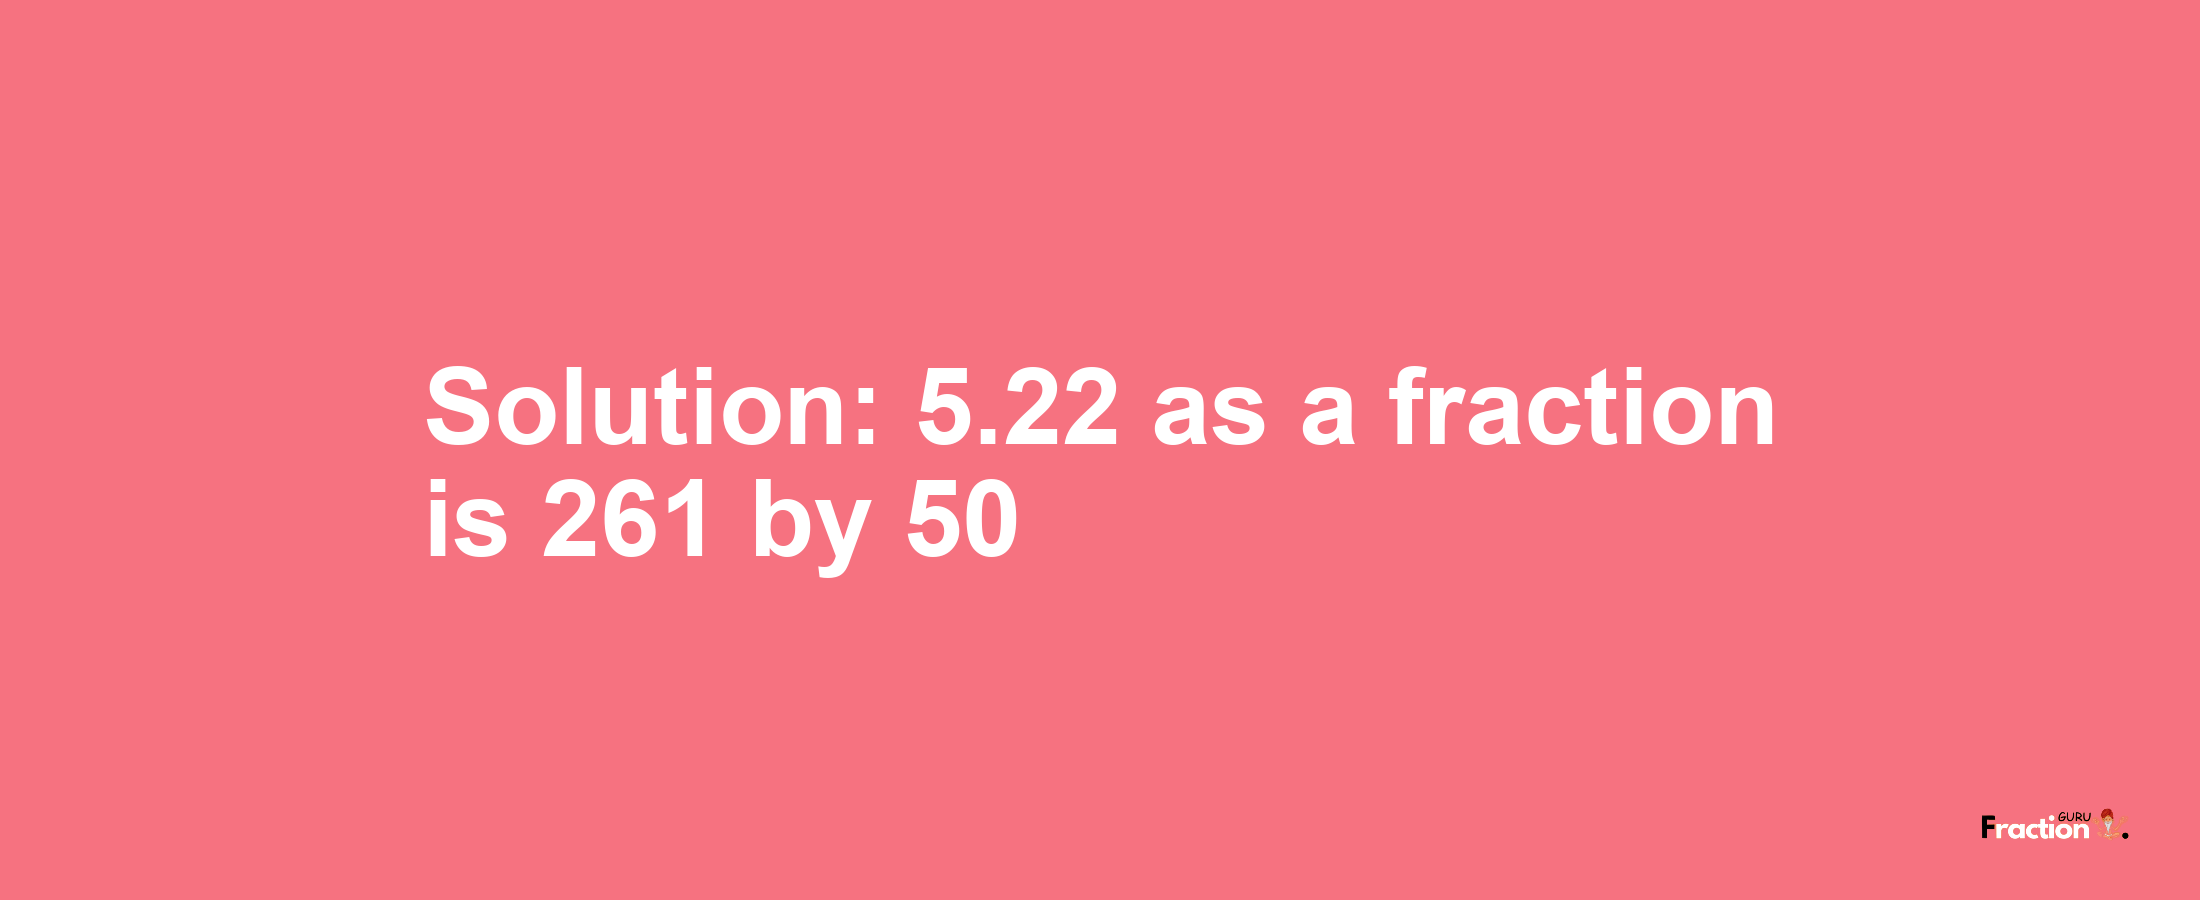 Solution:5.22 as a fraction is 261/50